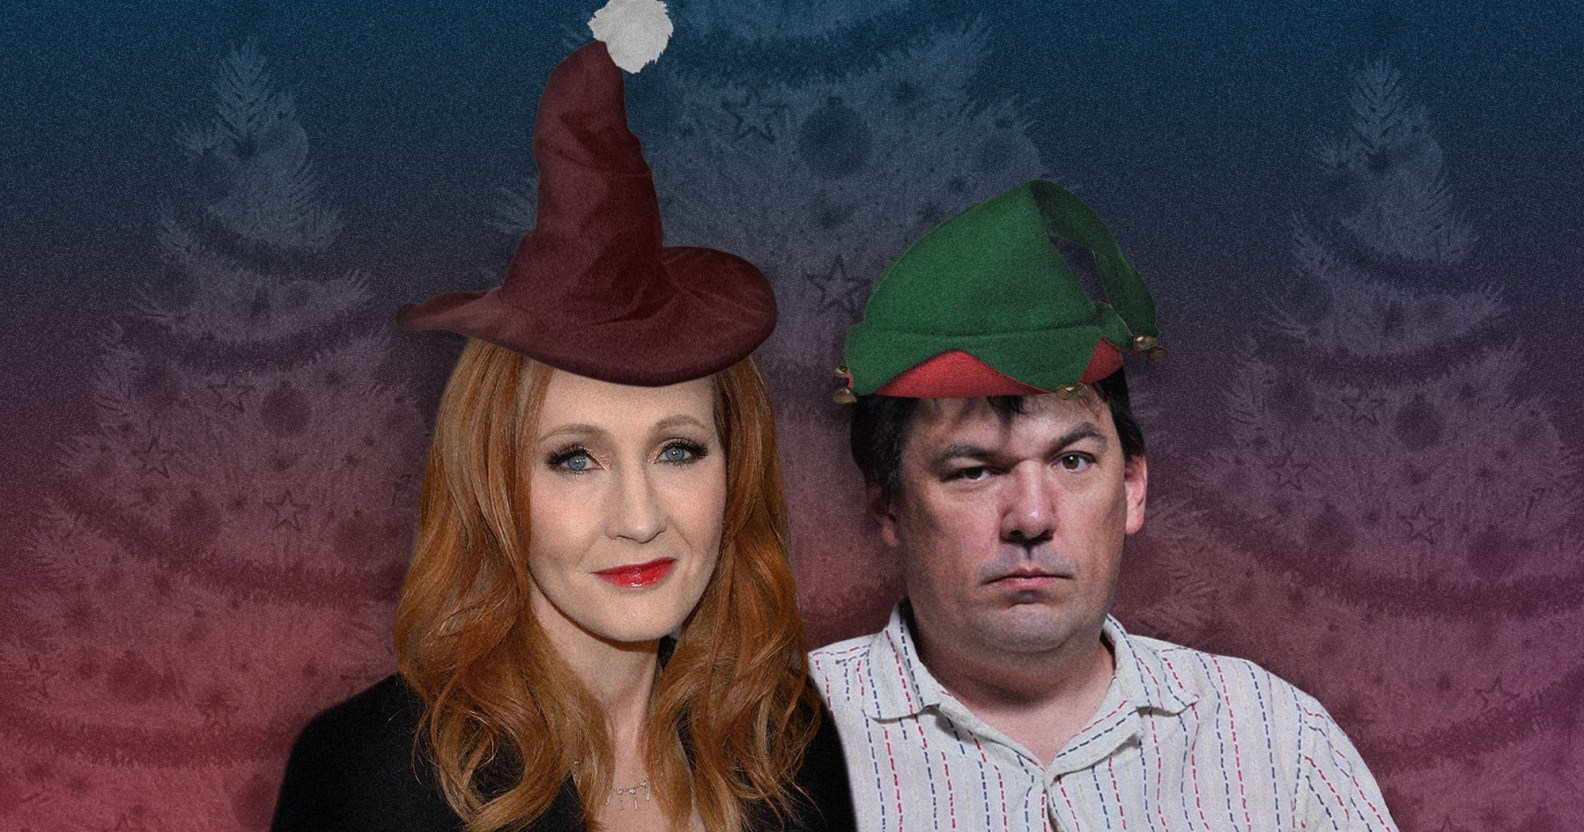 A graphic showing Harry Potter author JK Rowling (left) wearing a witch's hat and Father Ted creator Graham Linehan wearing an elf hat against a background showing Christmas tree shapes